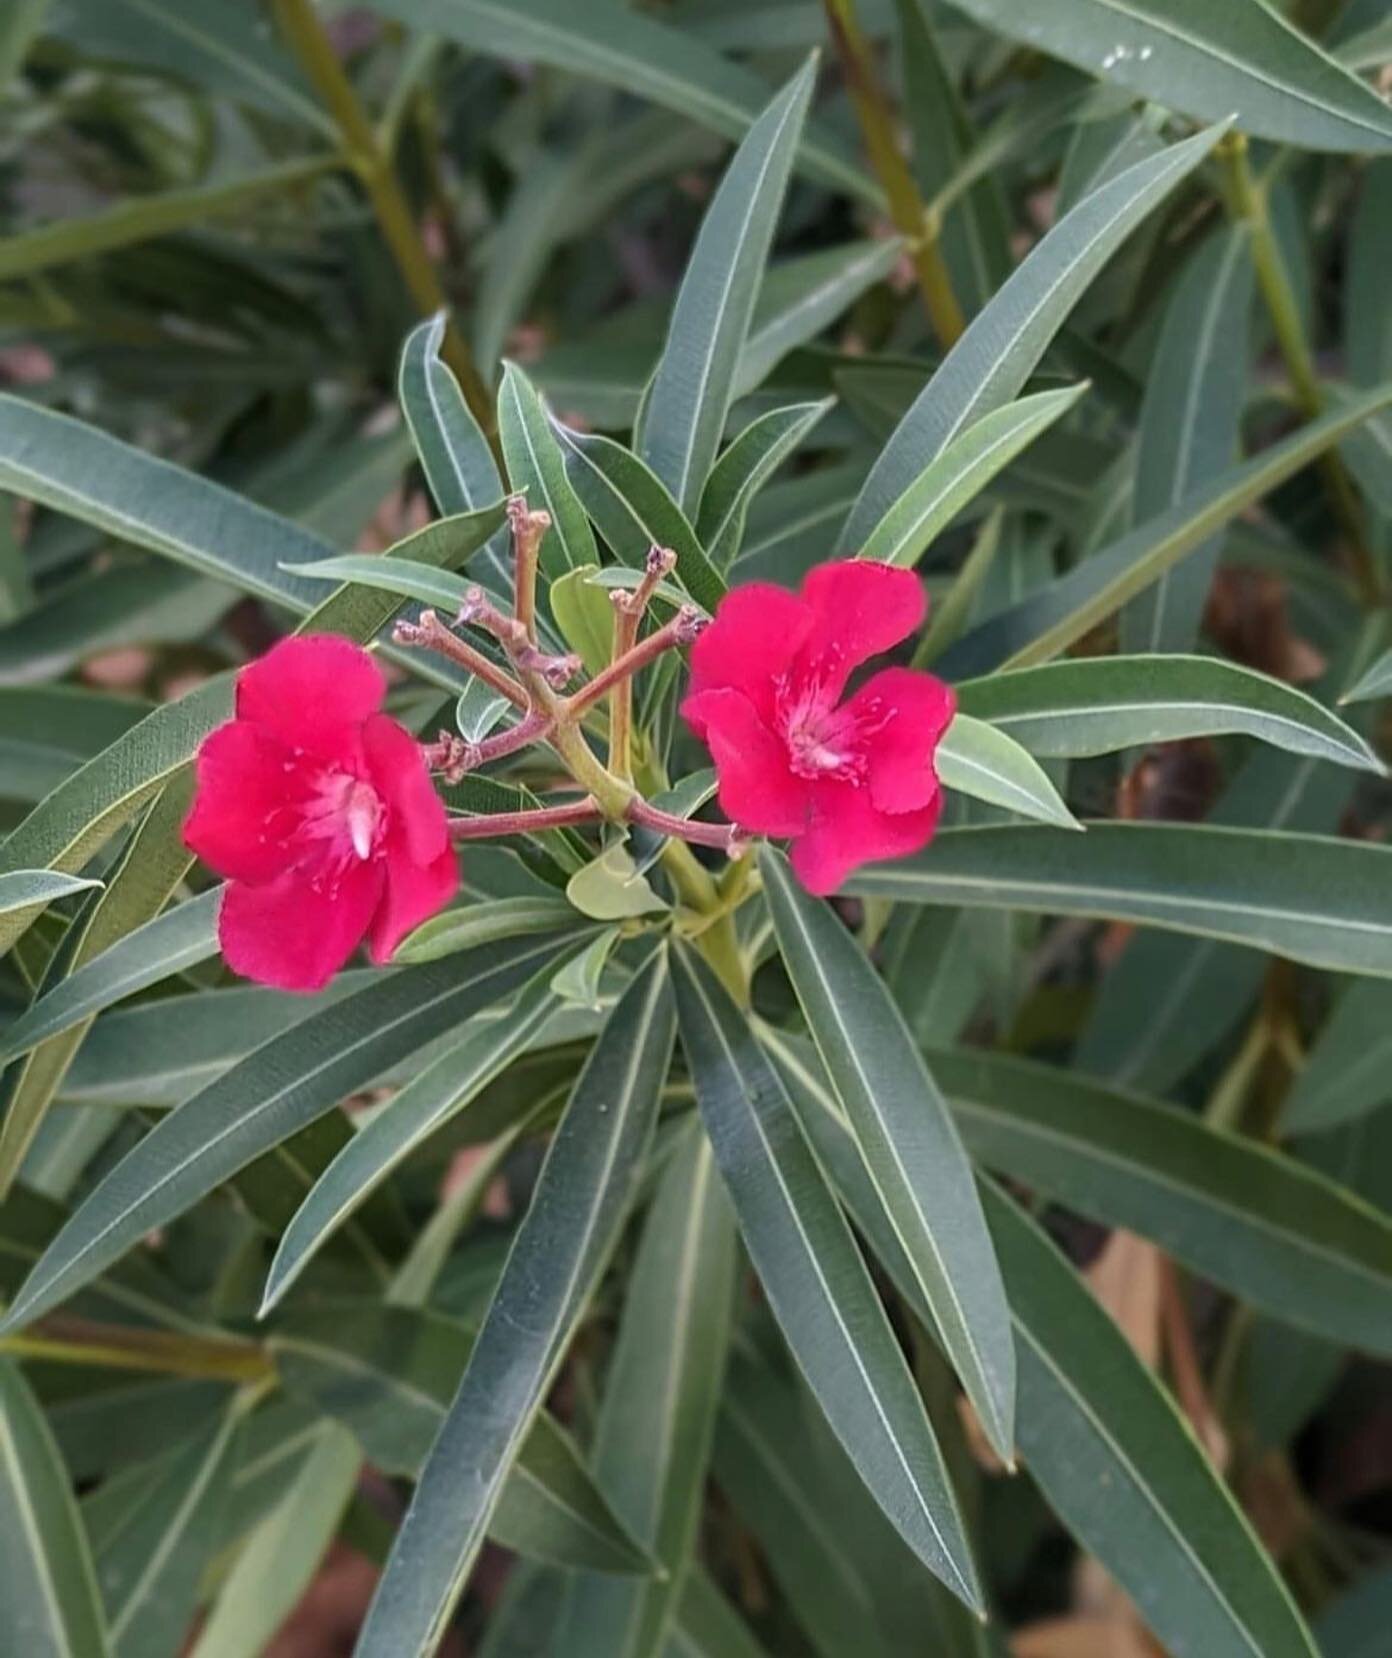 Love oleander as a flower essence for bringing clarity and truth.

🌺Oleander allows you to gain a sense of your true beliefs and ideas. 

🌺The essence releases an ease of communication 

🌺Oleander allows you to understand yourself and guide yourse